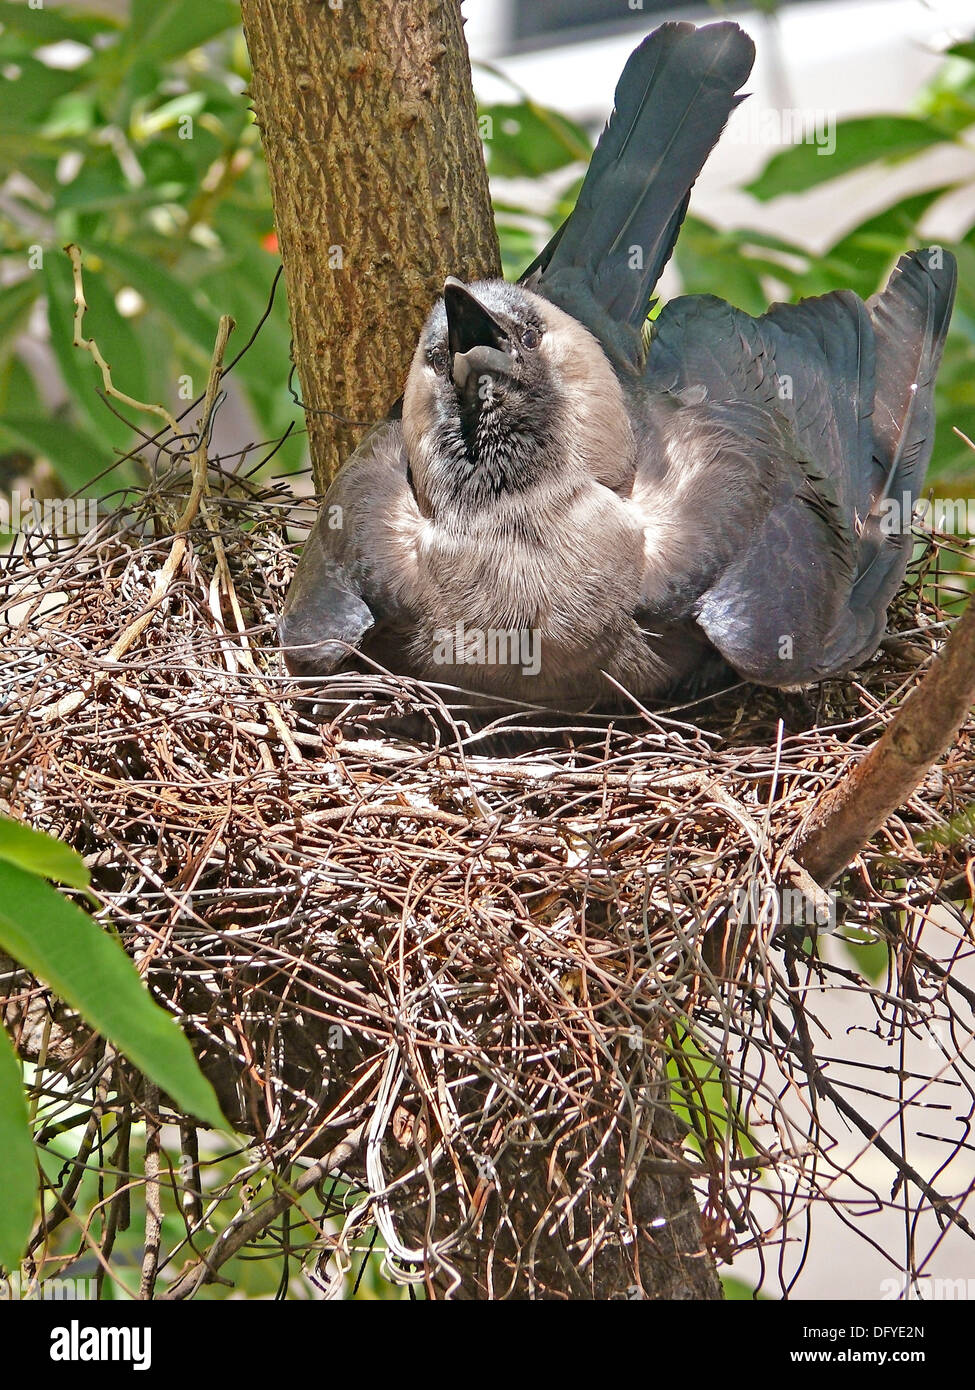 Nest of a house crow, Corvus Splendens with Young ones Stock Photo - Alamy